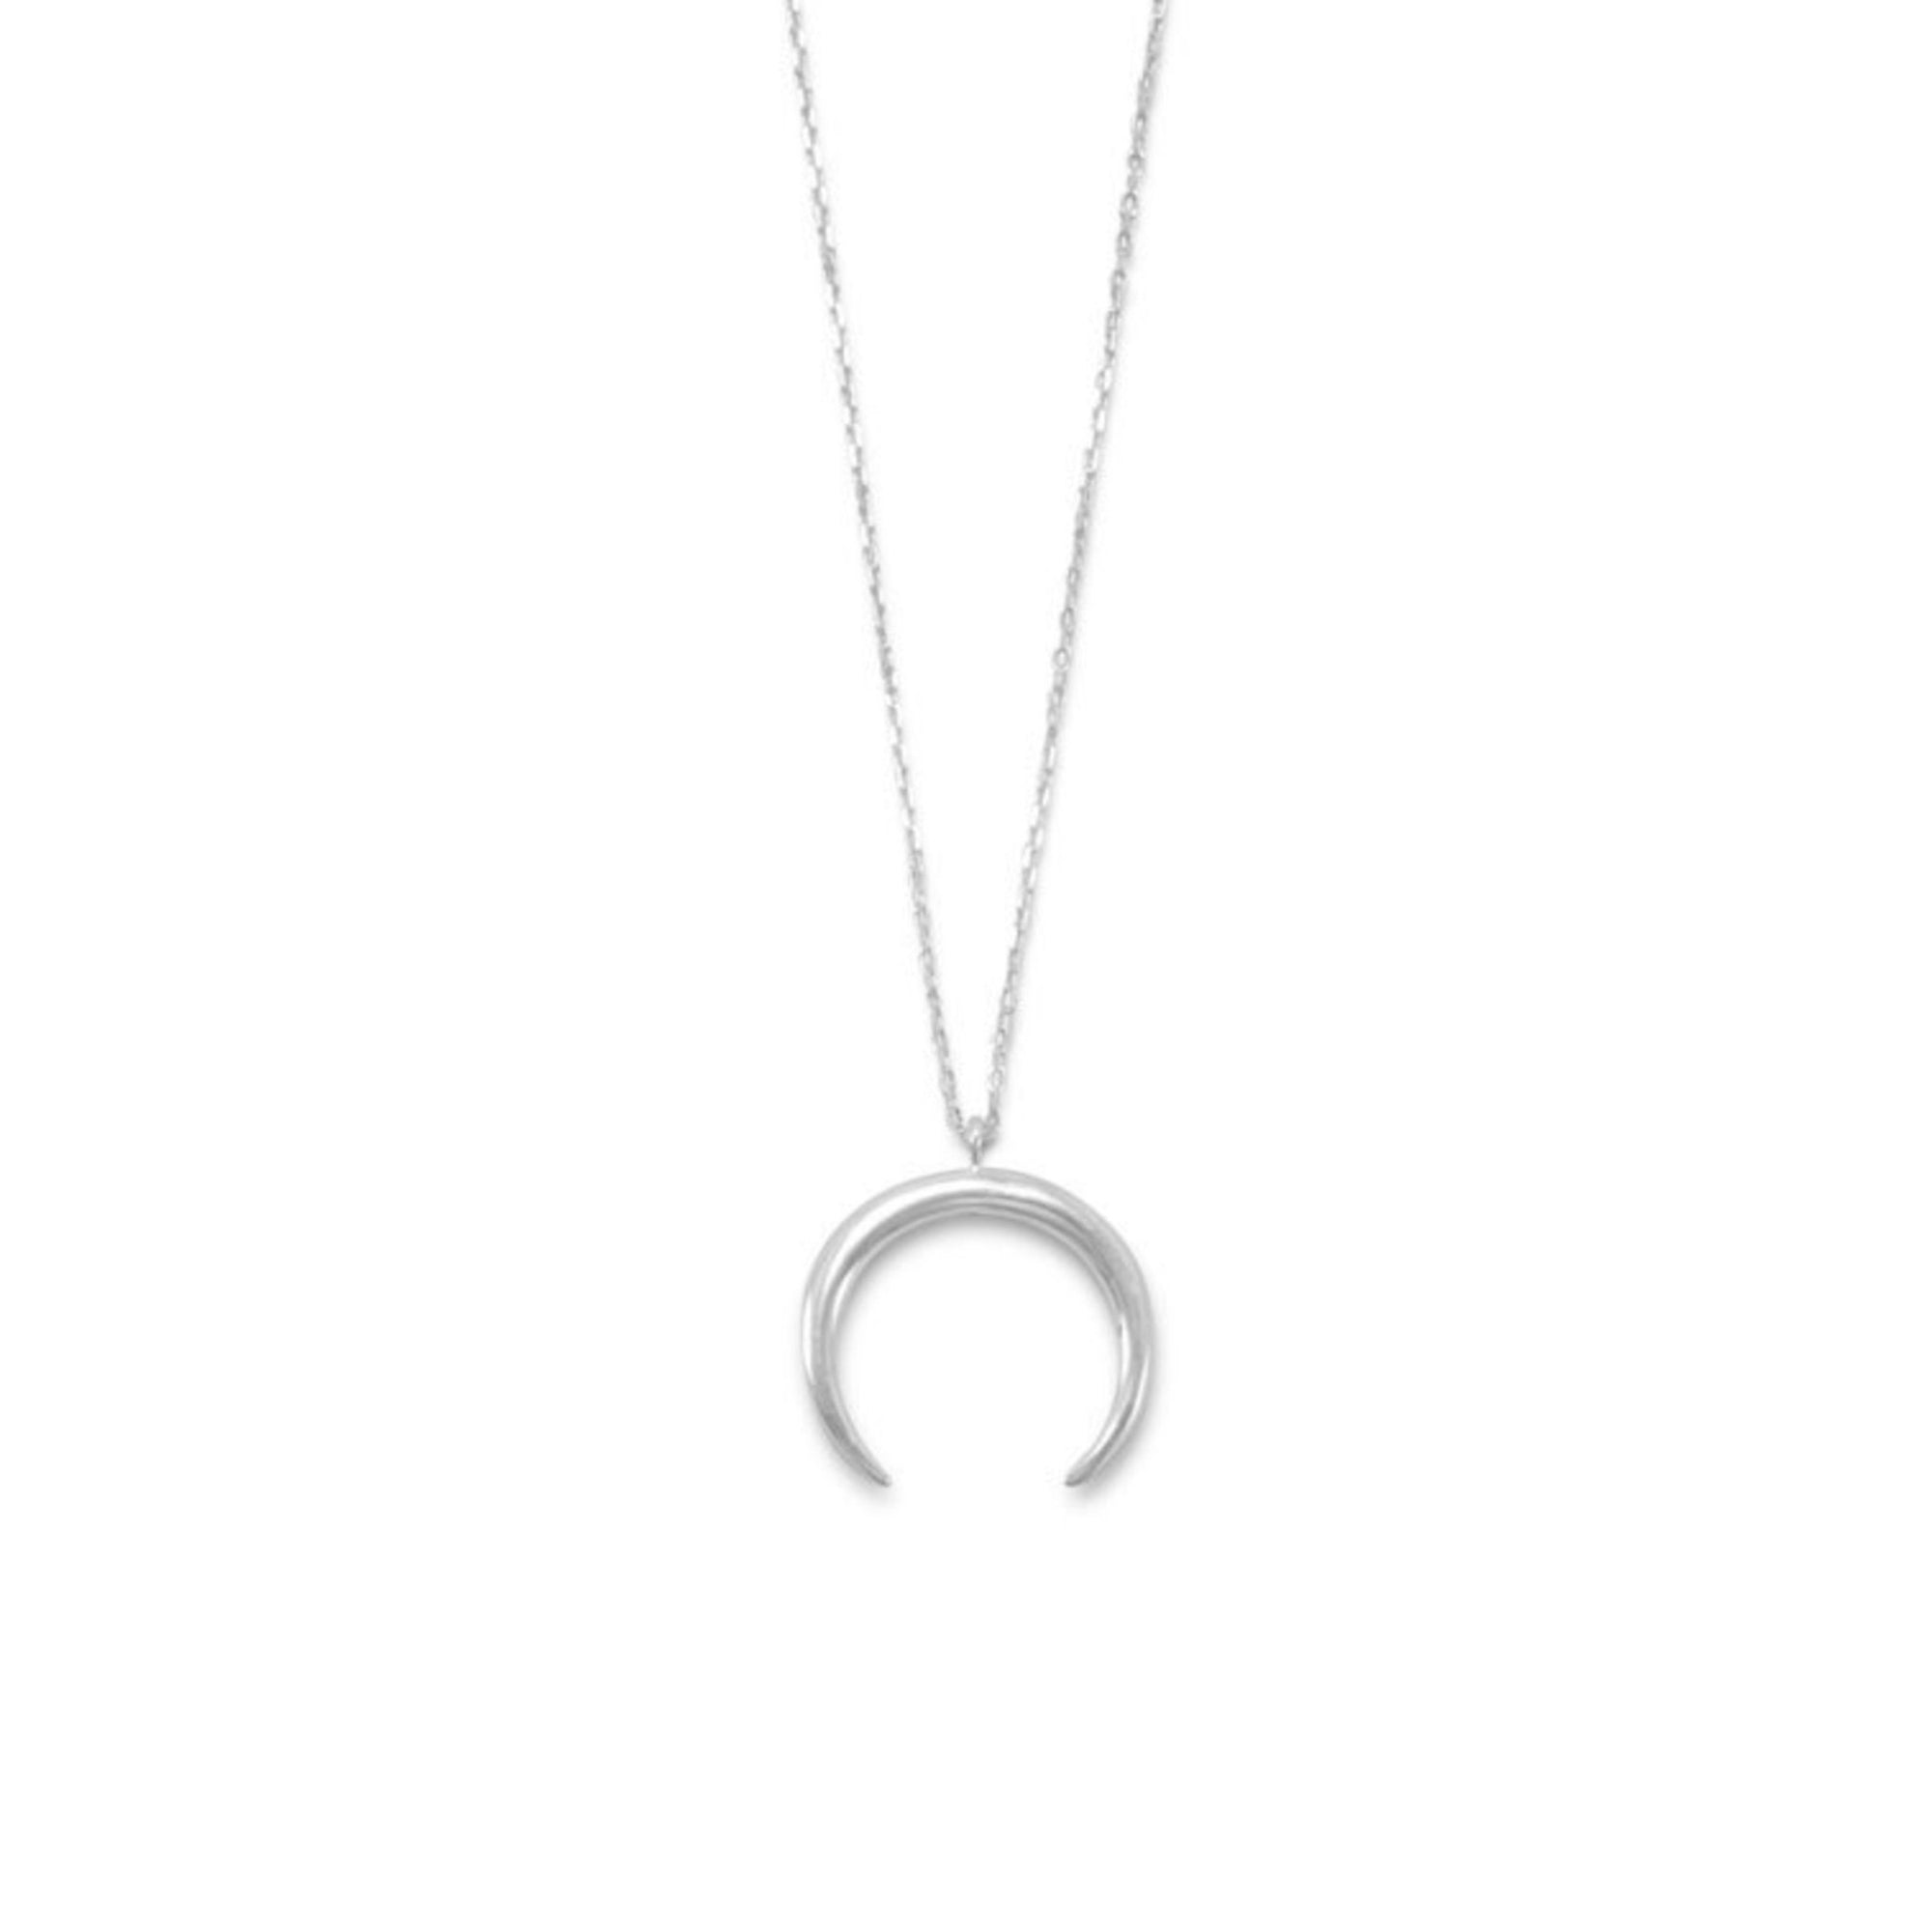 Cassie Silver Crescent Moon Necklace - Pretty Collected